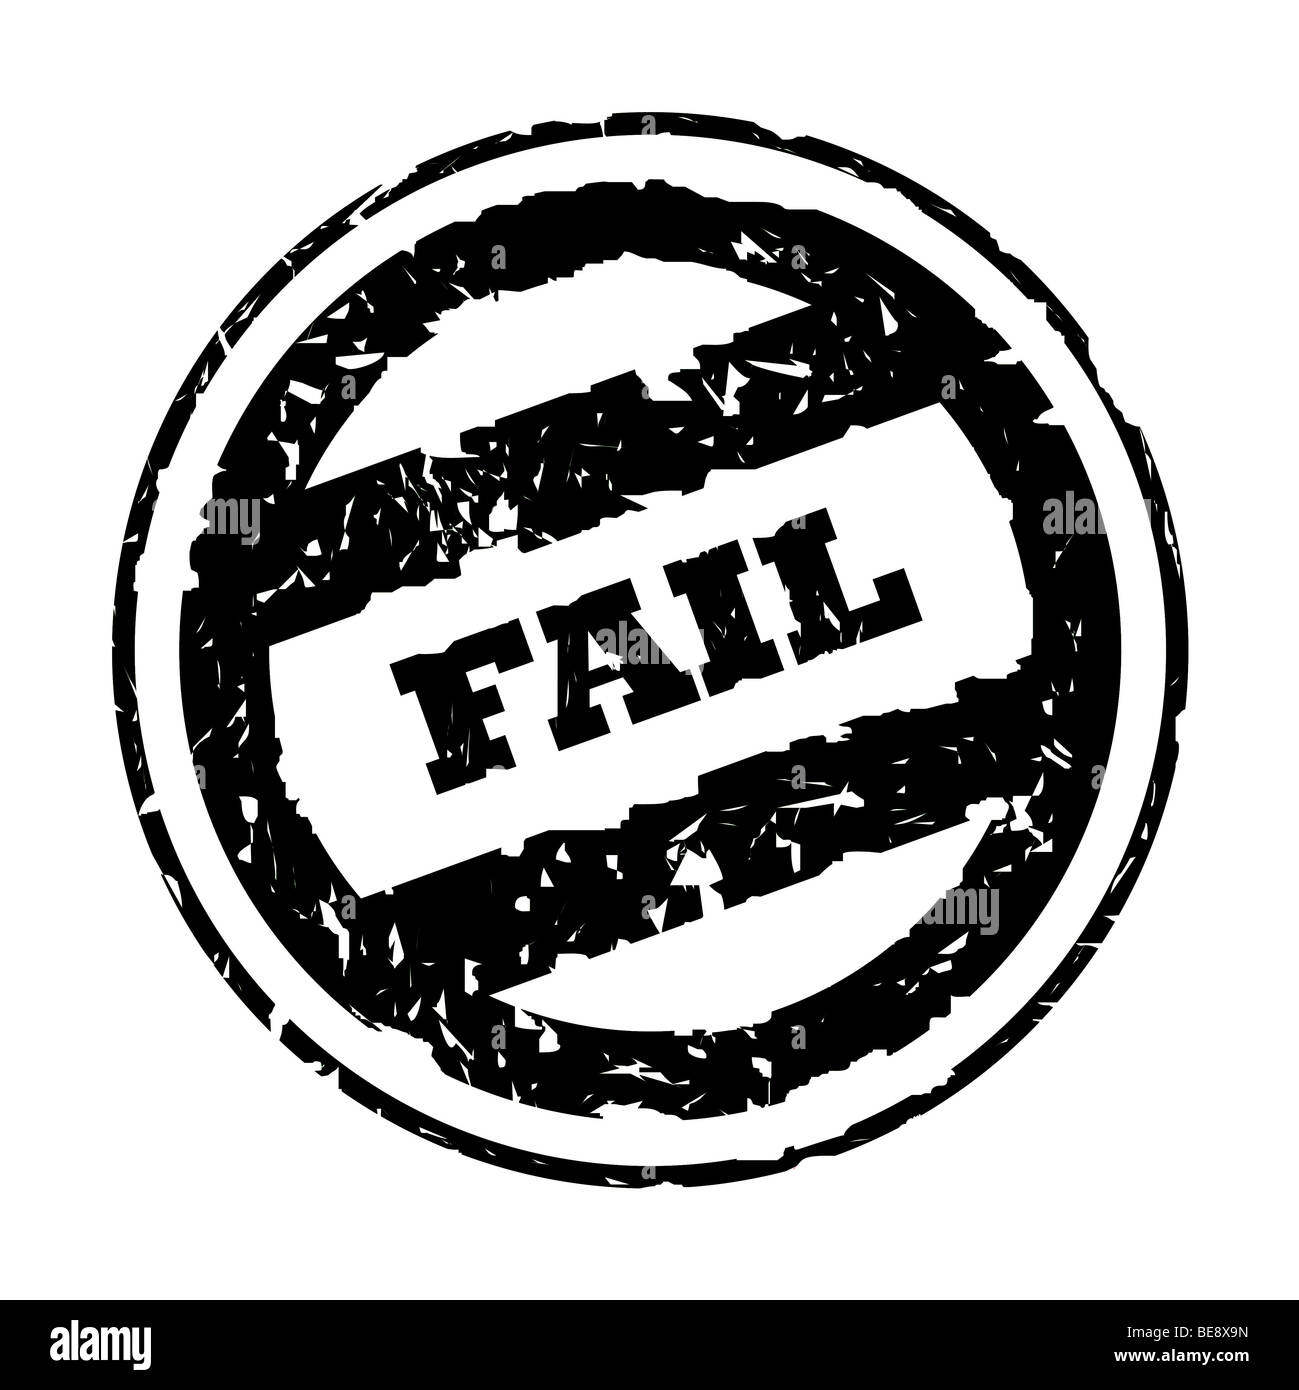 Used black business fail stamp, isolated on white background. Stock Photo